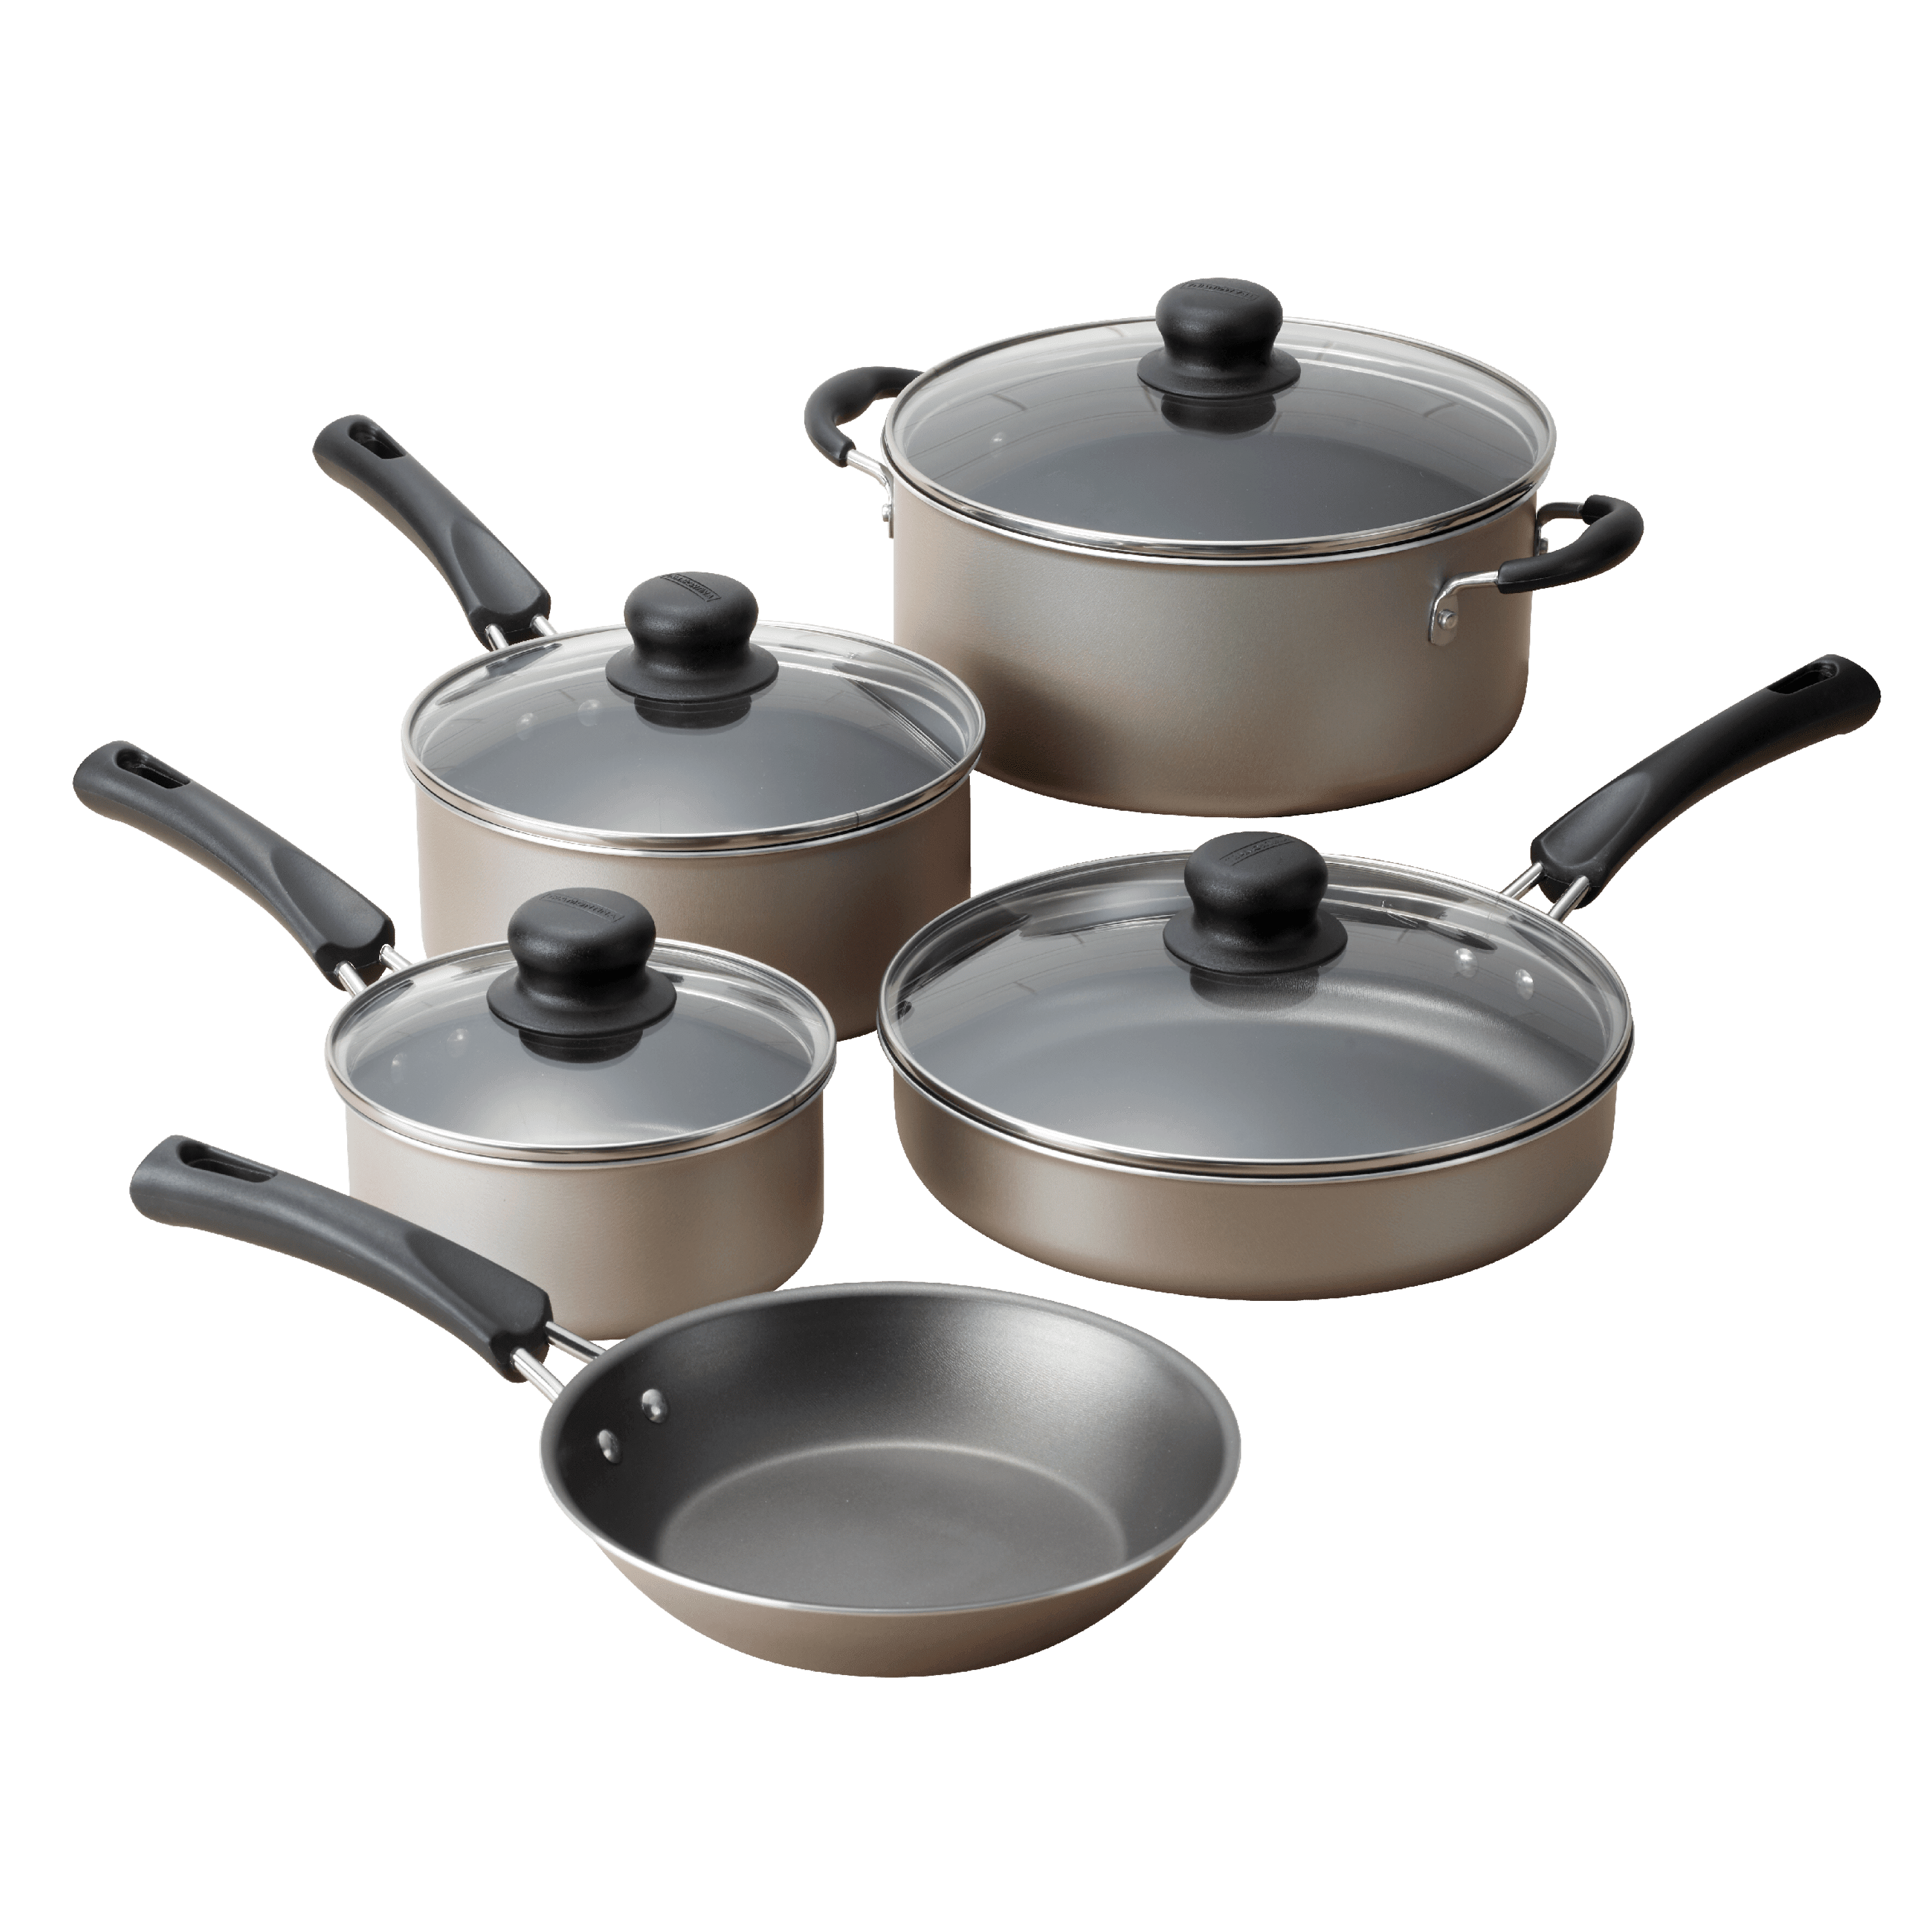 MsMk 9-Piece Pots and Pans Set Nonstick, Congee Rice Eggs Burnt Also Non Stick, Evenly Heated Smooth Bottom, Oven Safe to 700